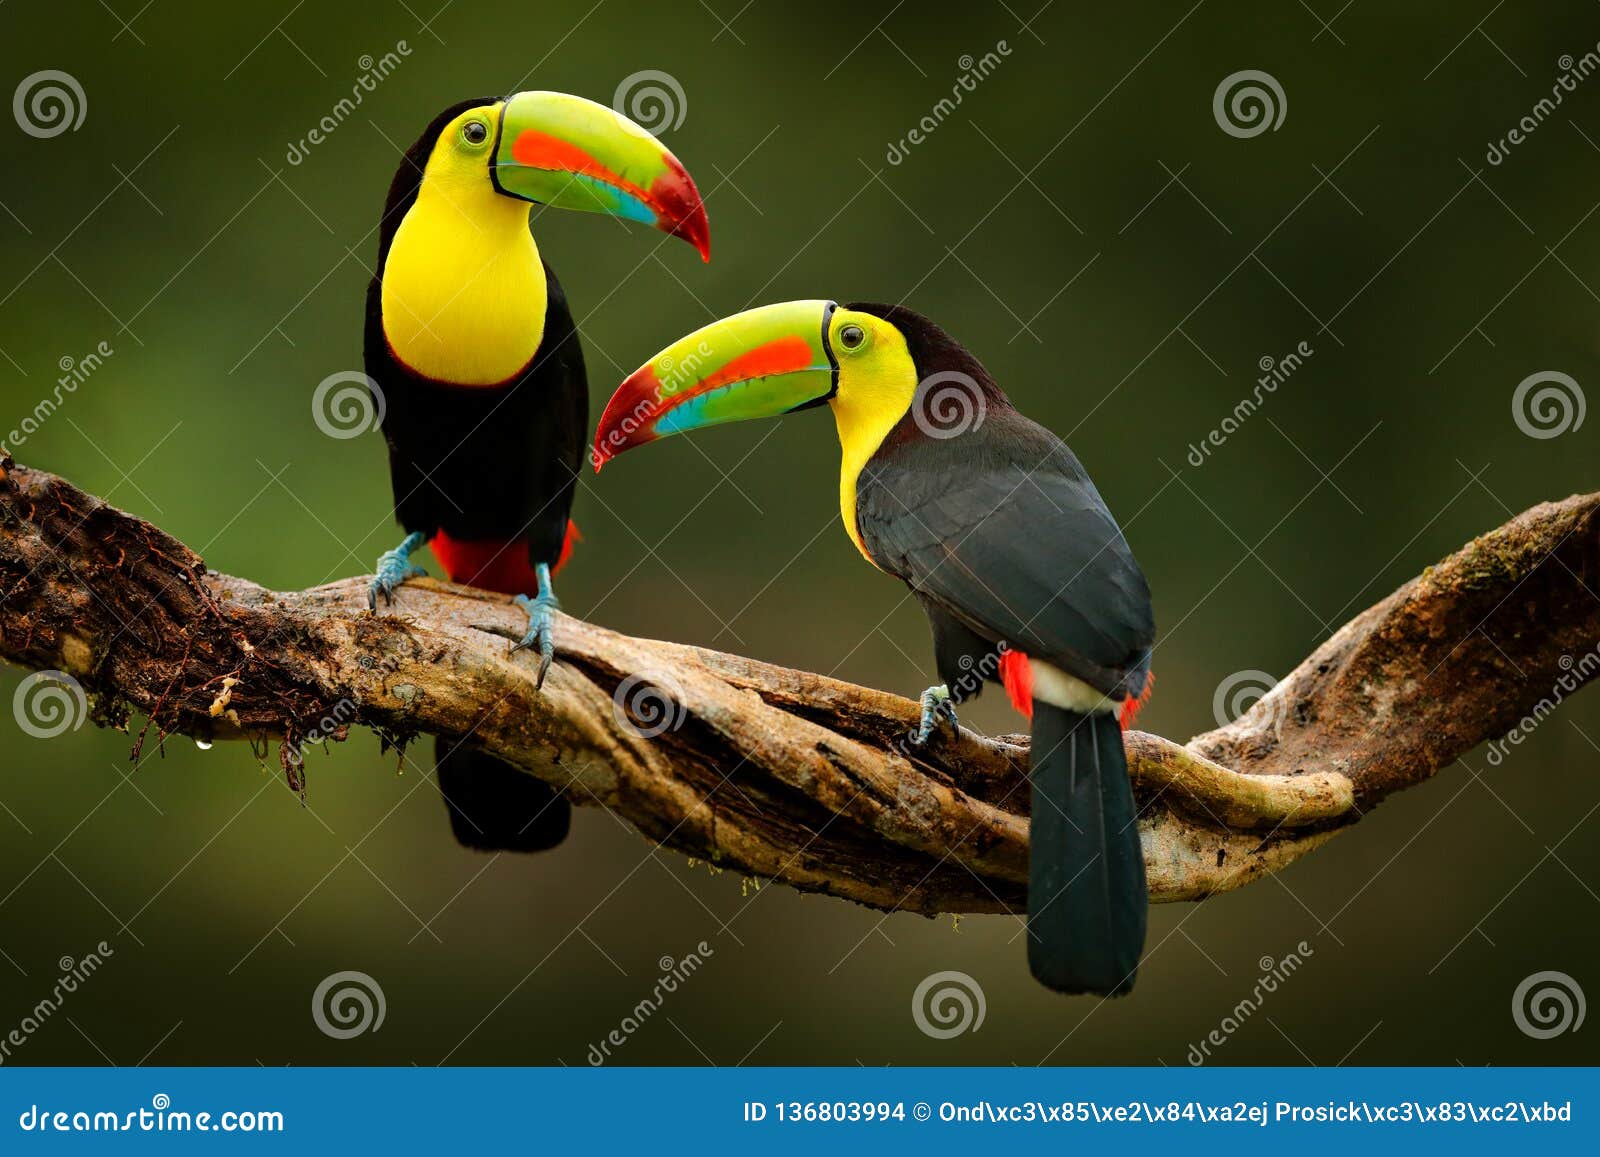 toucan sitting on the branch in the forest, green vegetation, costa rica. nature travel in central america. two keel-billed toucan